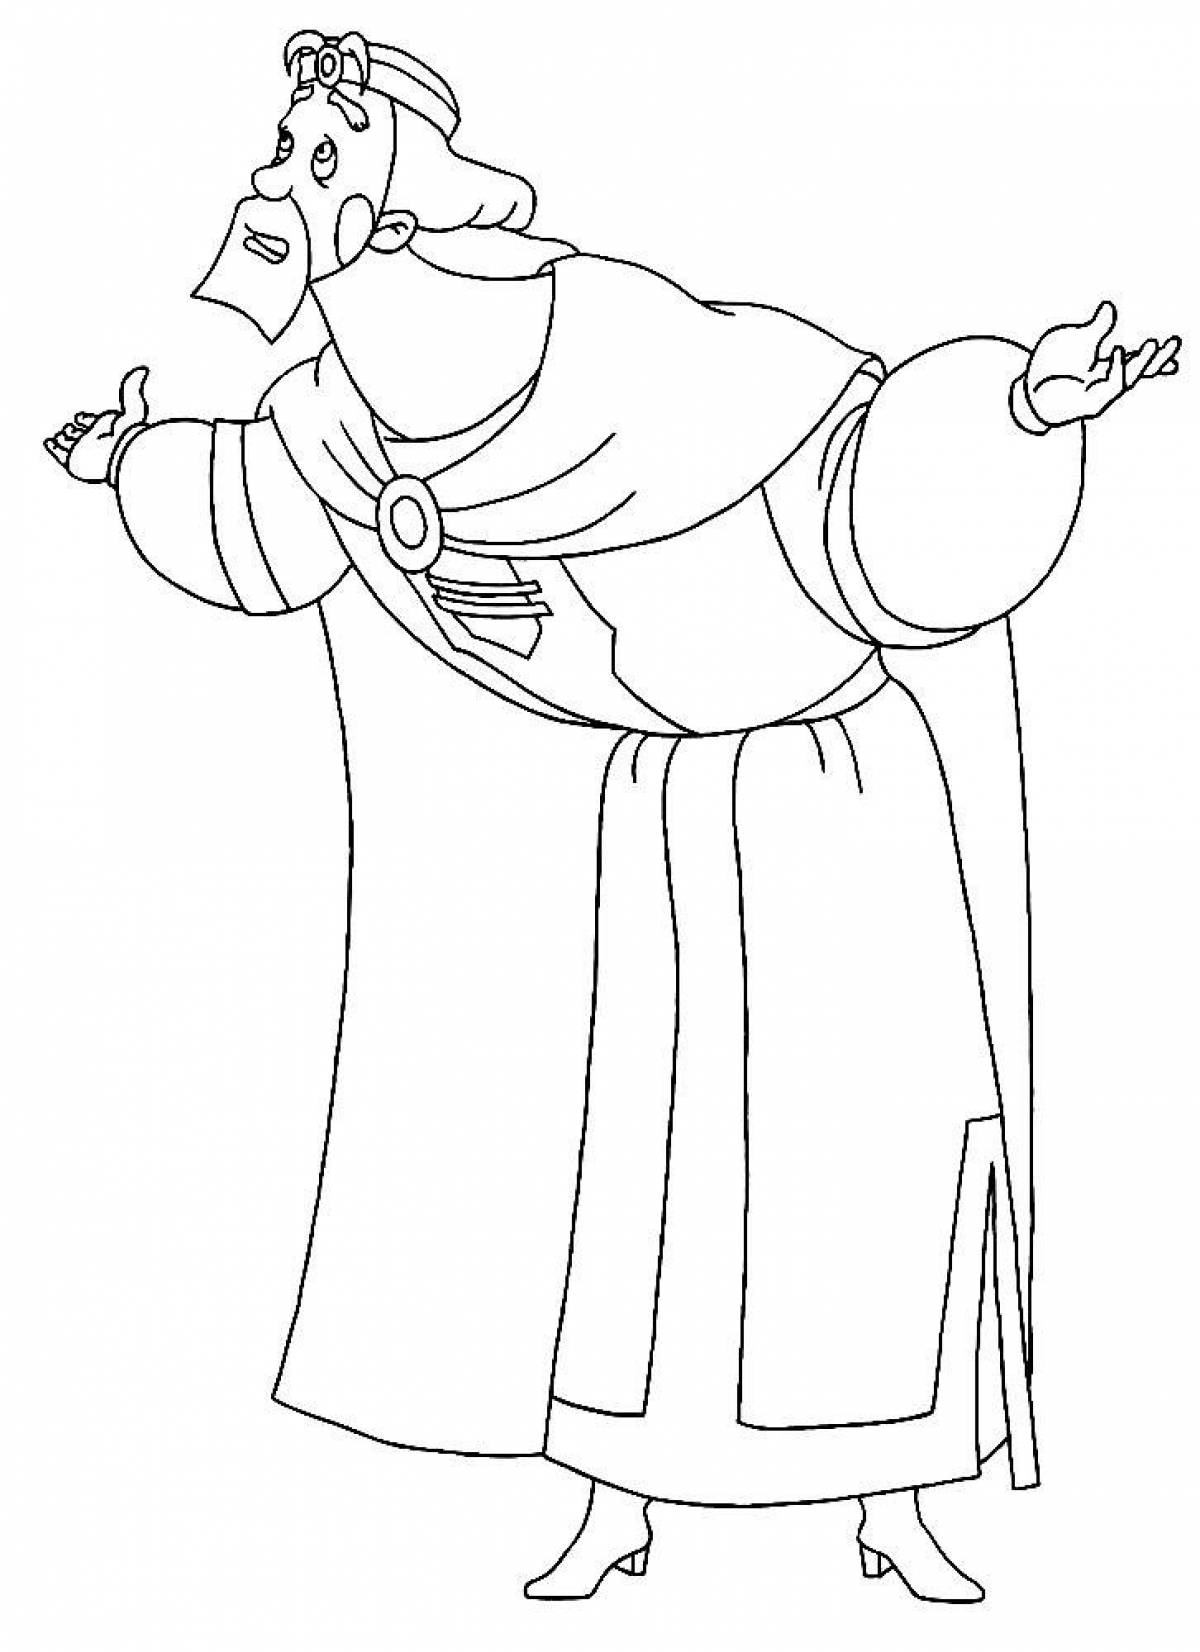 Fun coloring page 3 heroes